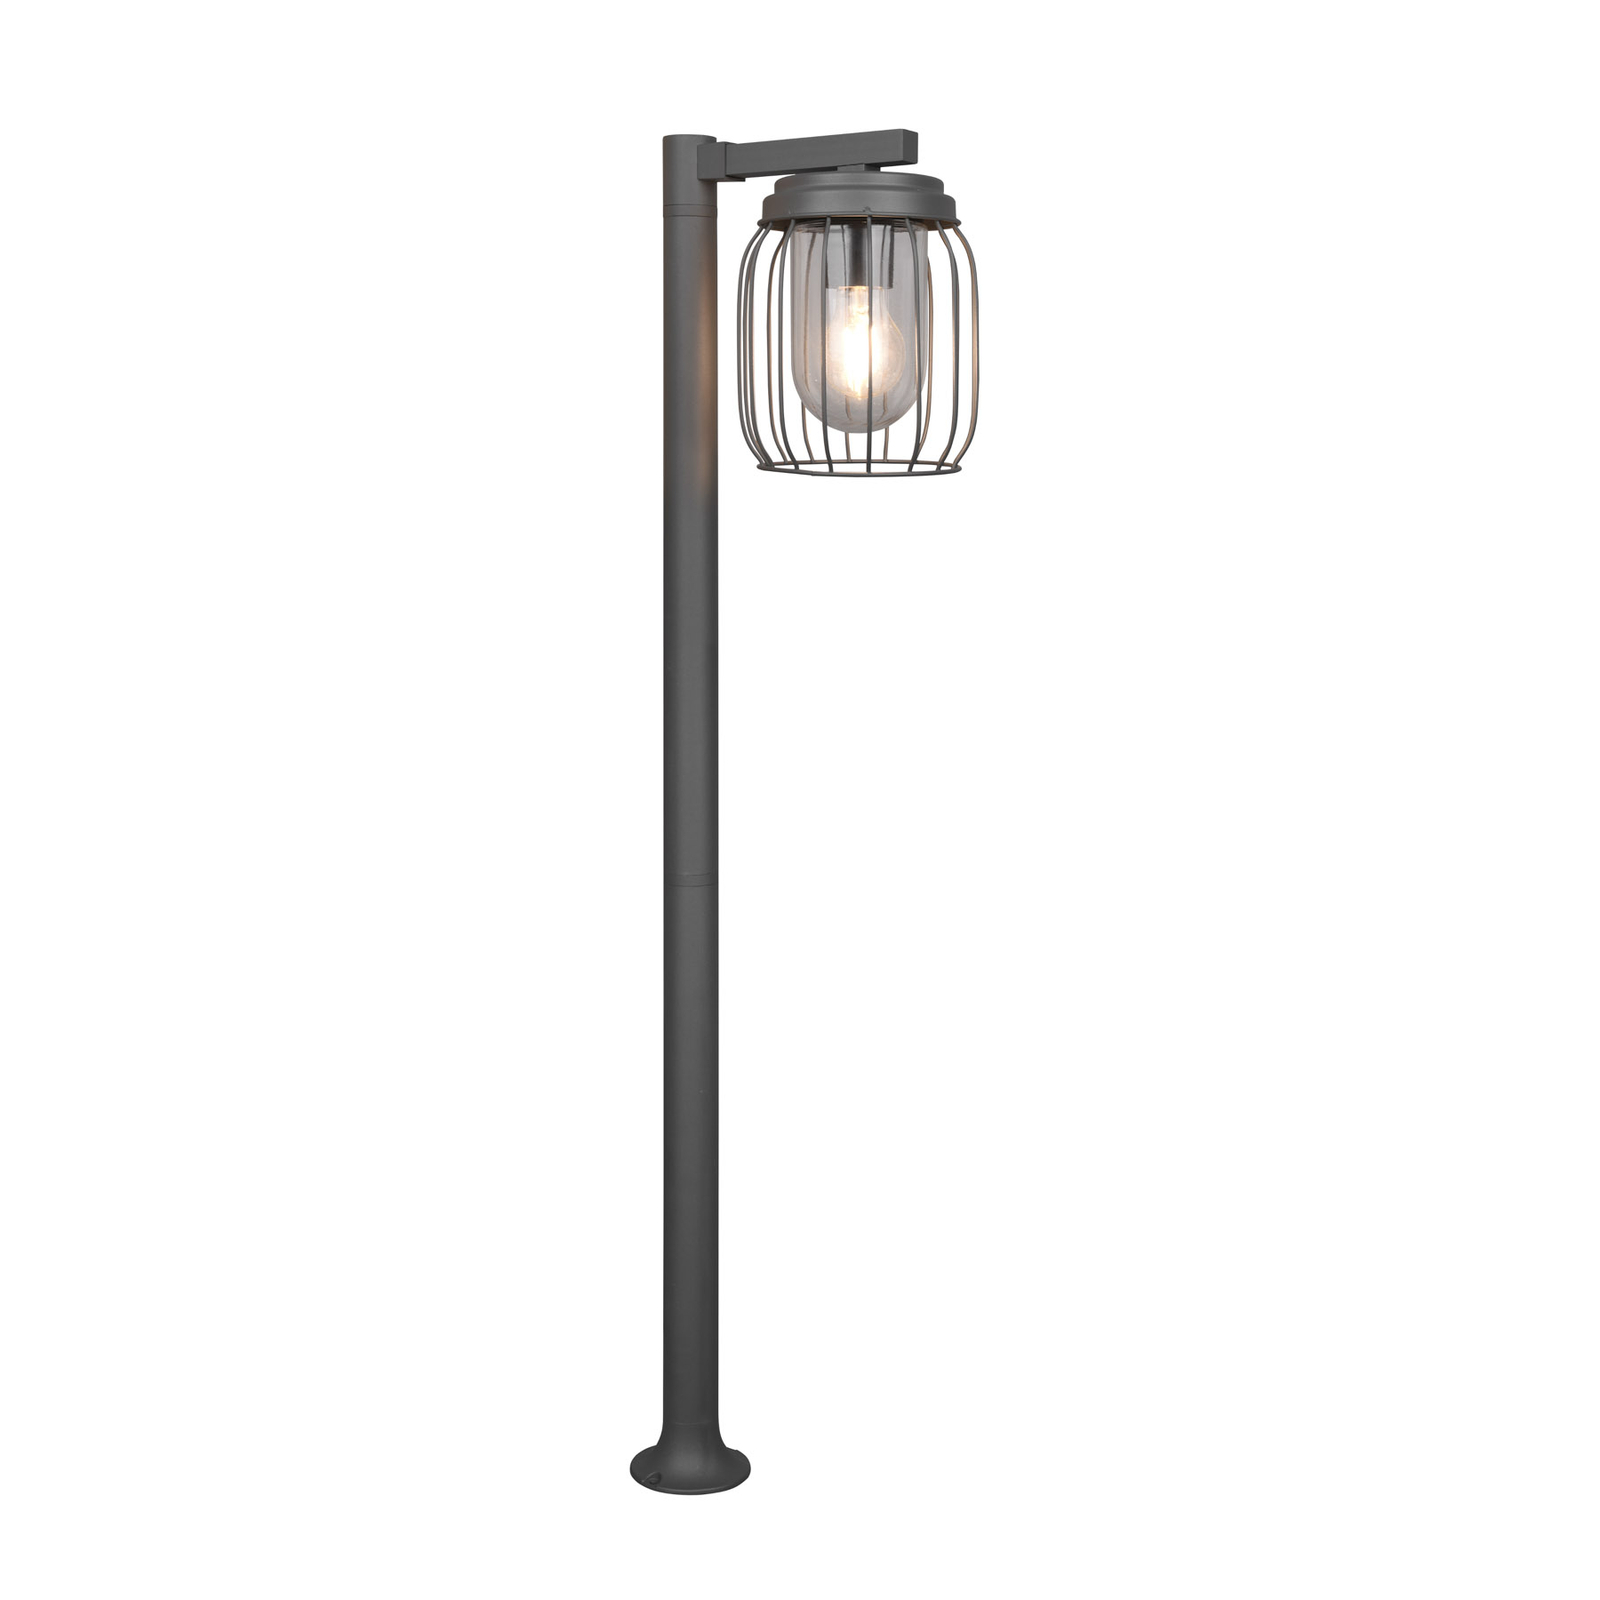 Tuela path light, height 100 cm, anthracite/clear